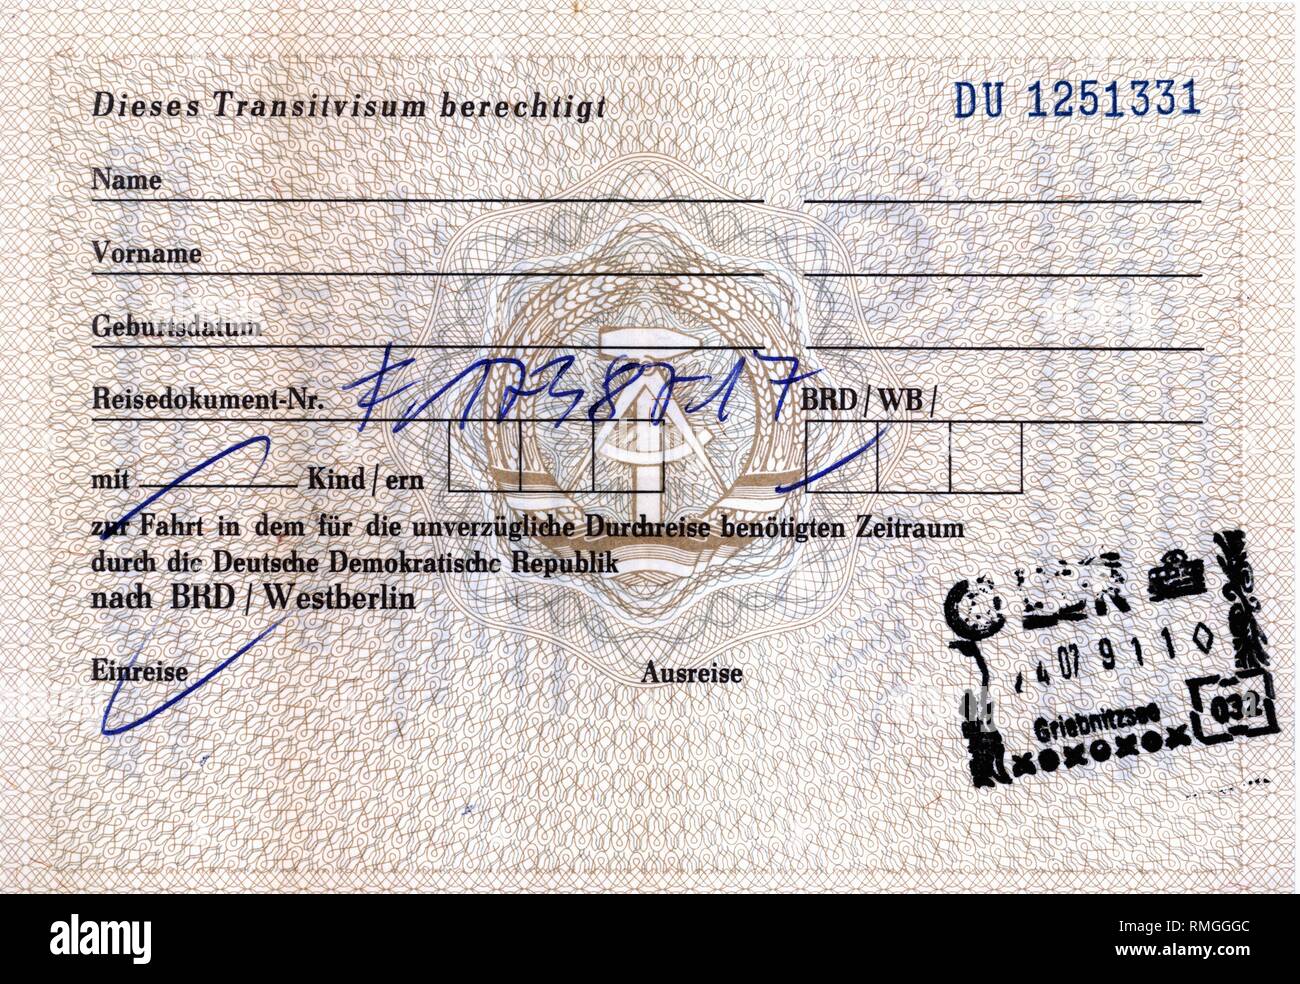 Back of the East German transit visa for a onetime journey through its territory on the prescribed transit routes. Issue date July 9, 1974. Stock Photo